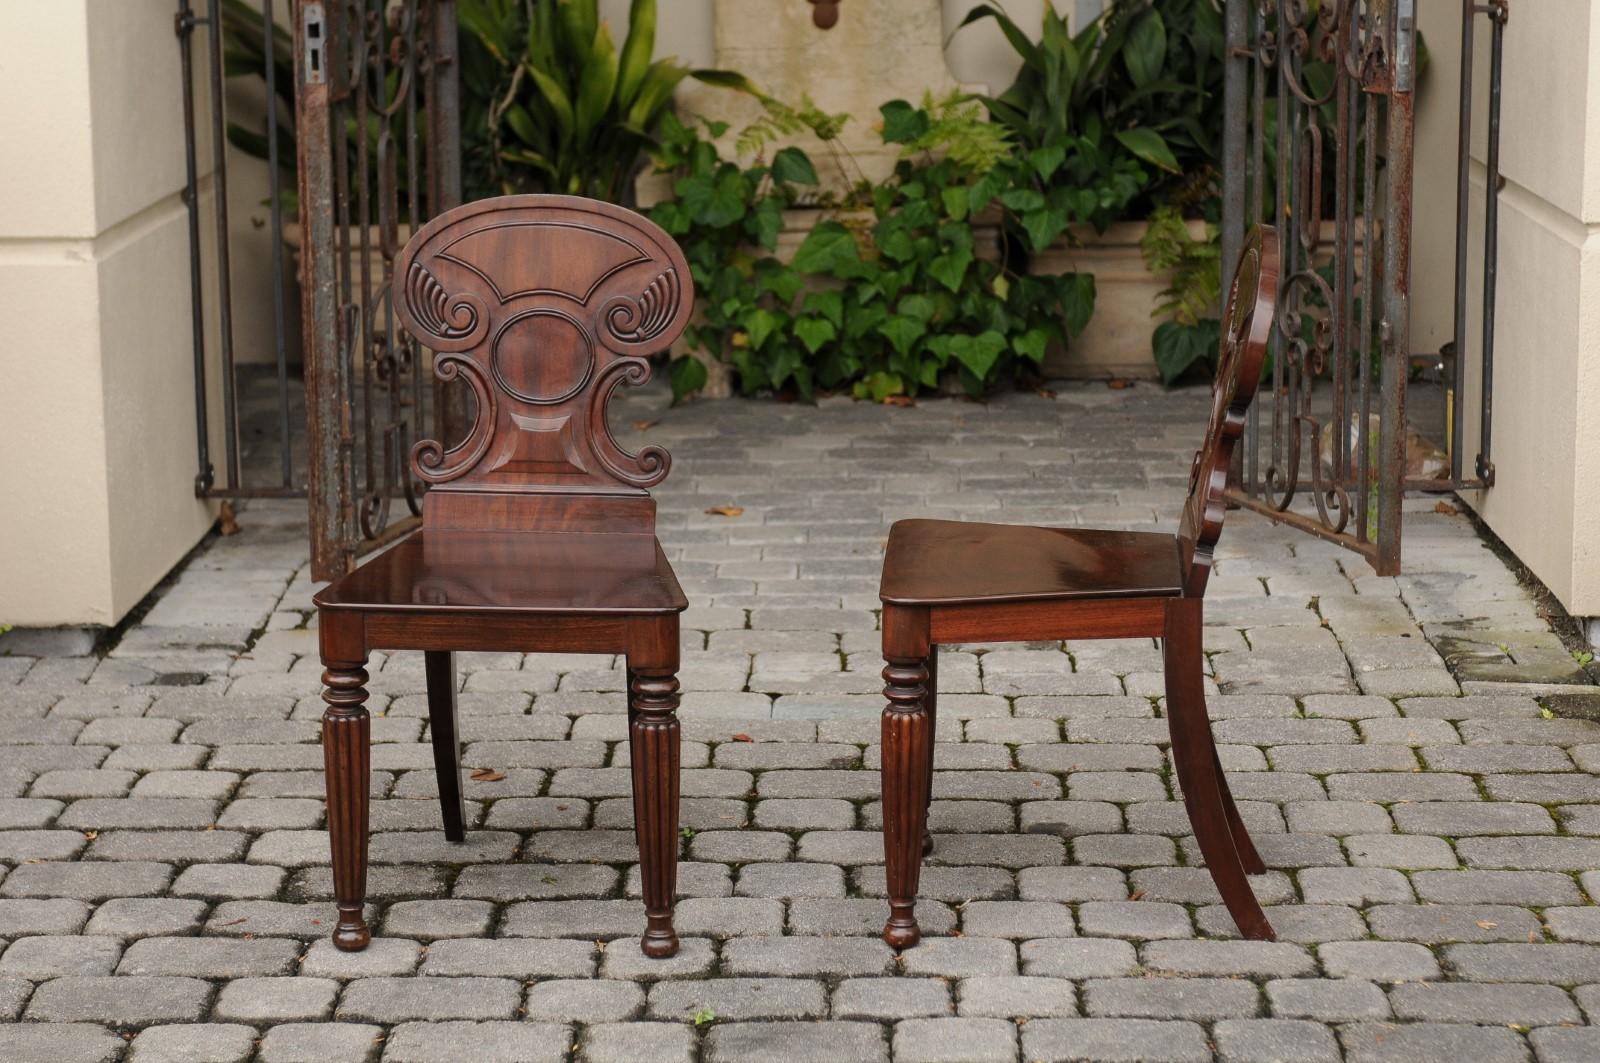 Pair of Regency Style 1870s Carved Mahogany Hall Chairs with C-Scroll Backs (Mahagoni)